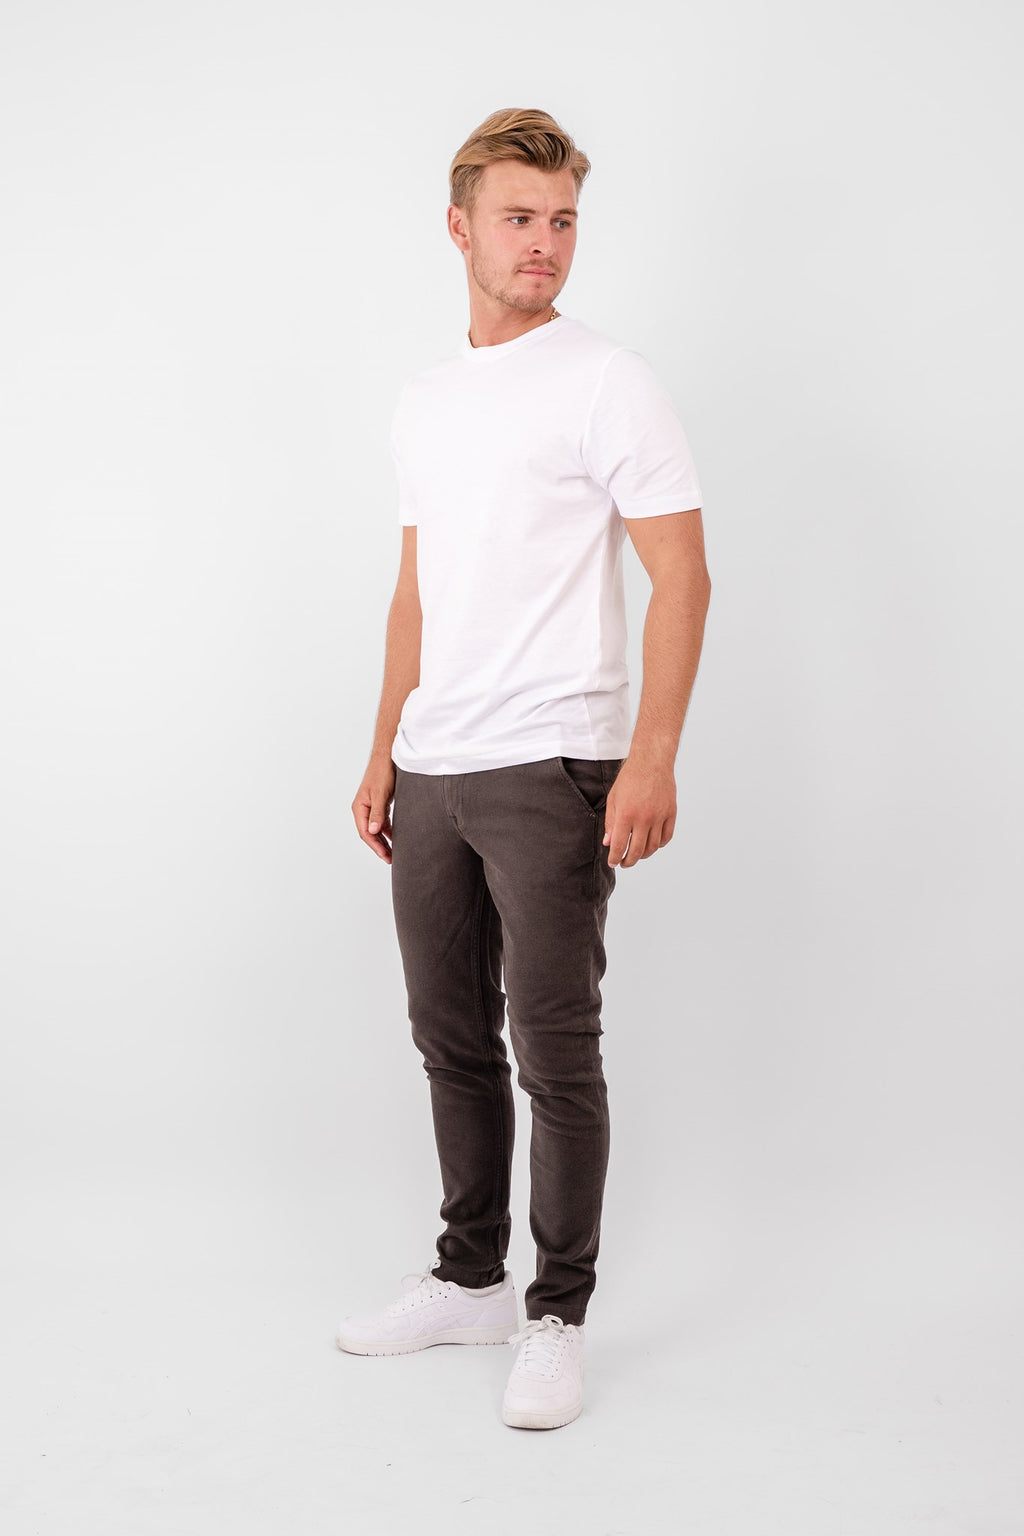 Performance Structure Trousers - Dark Brown